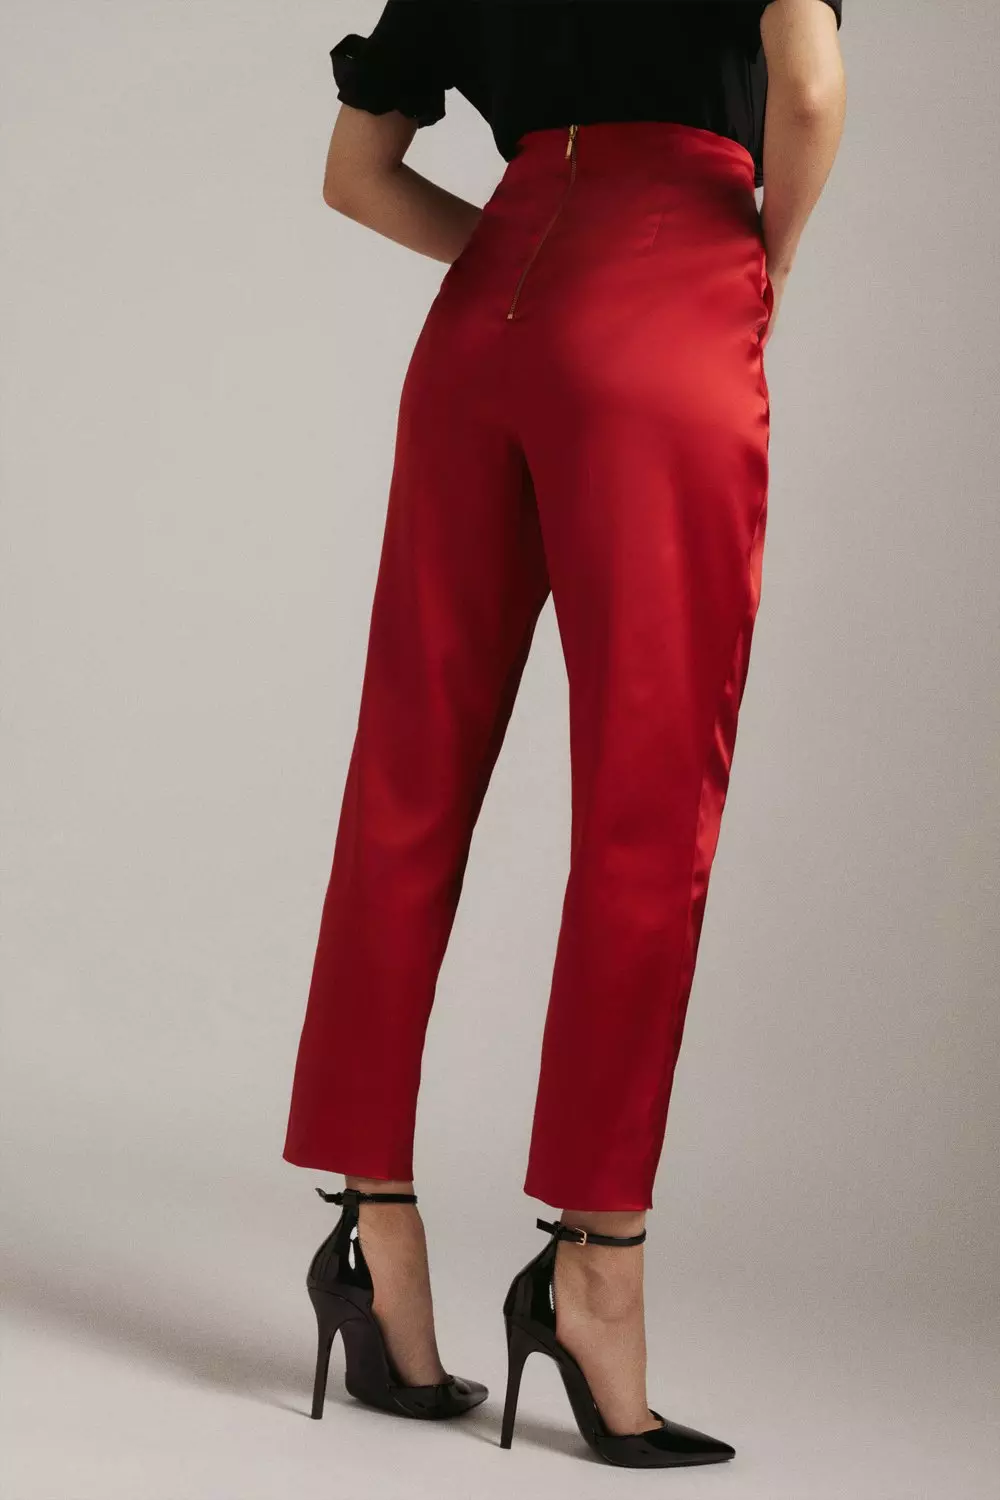 RED HAMMERED SATIN PANTS